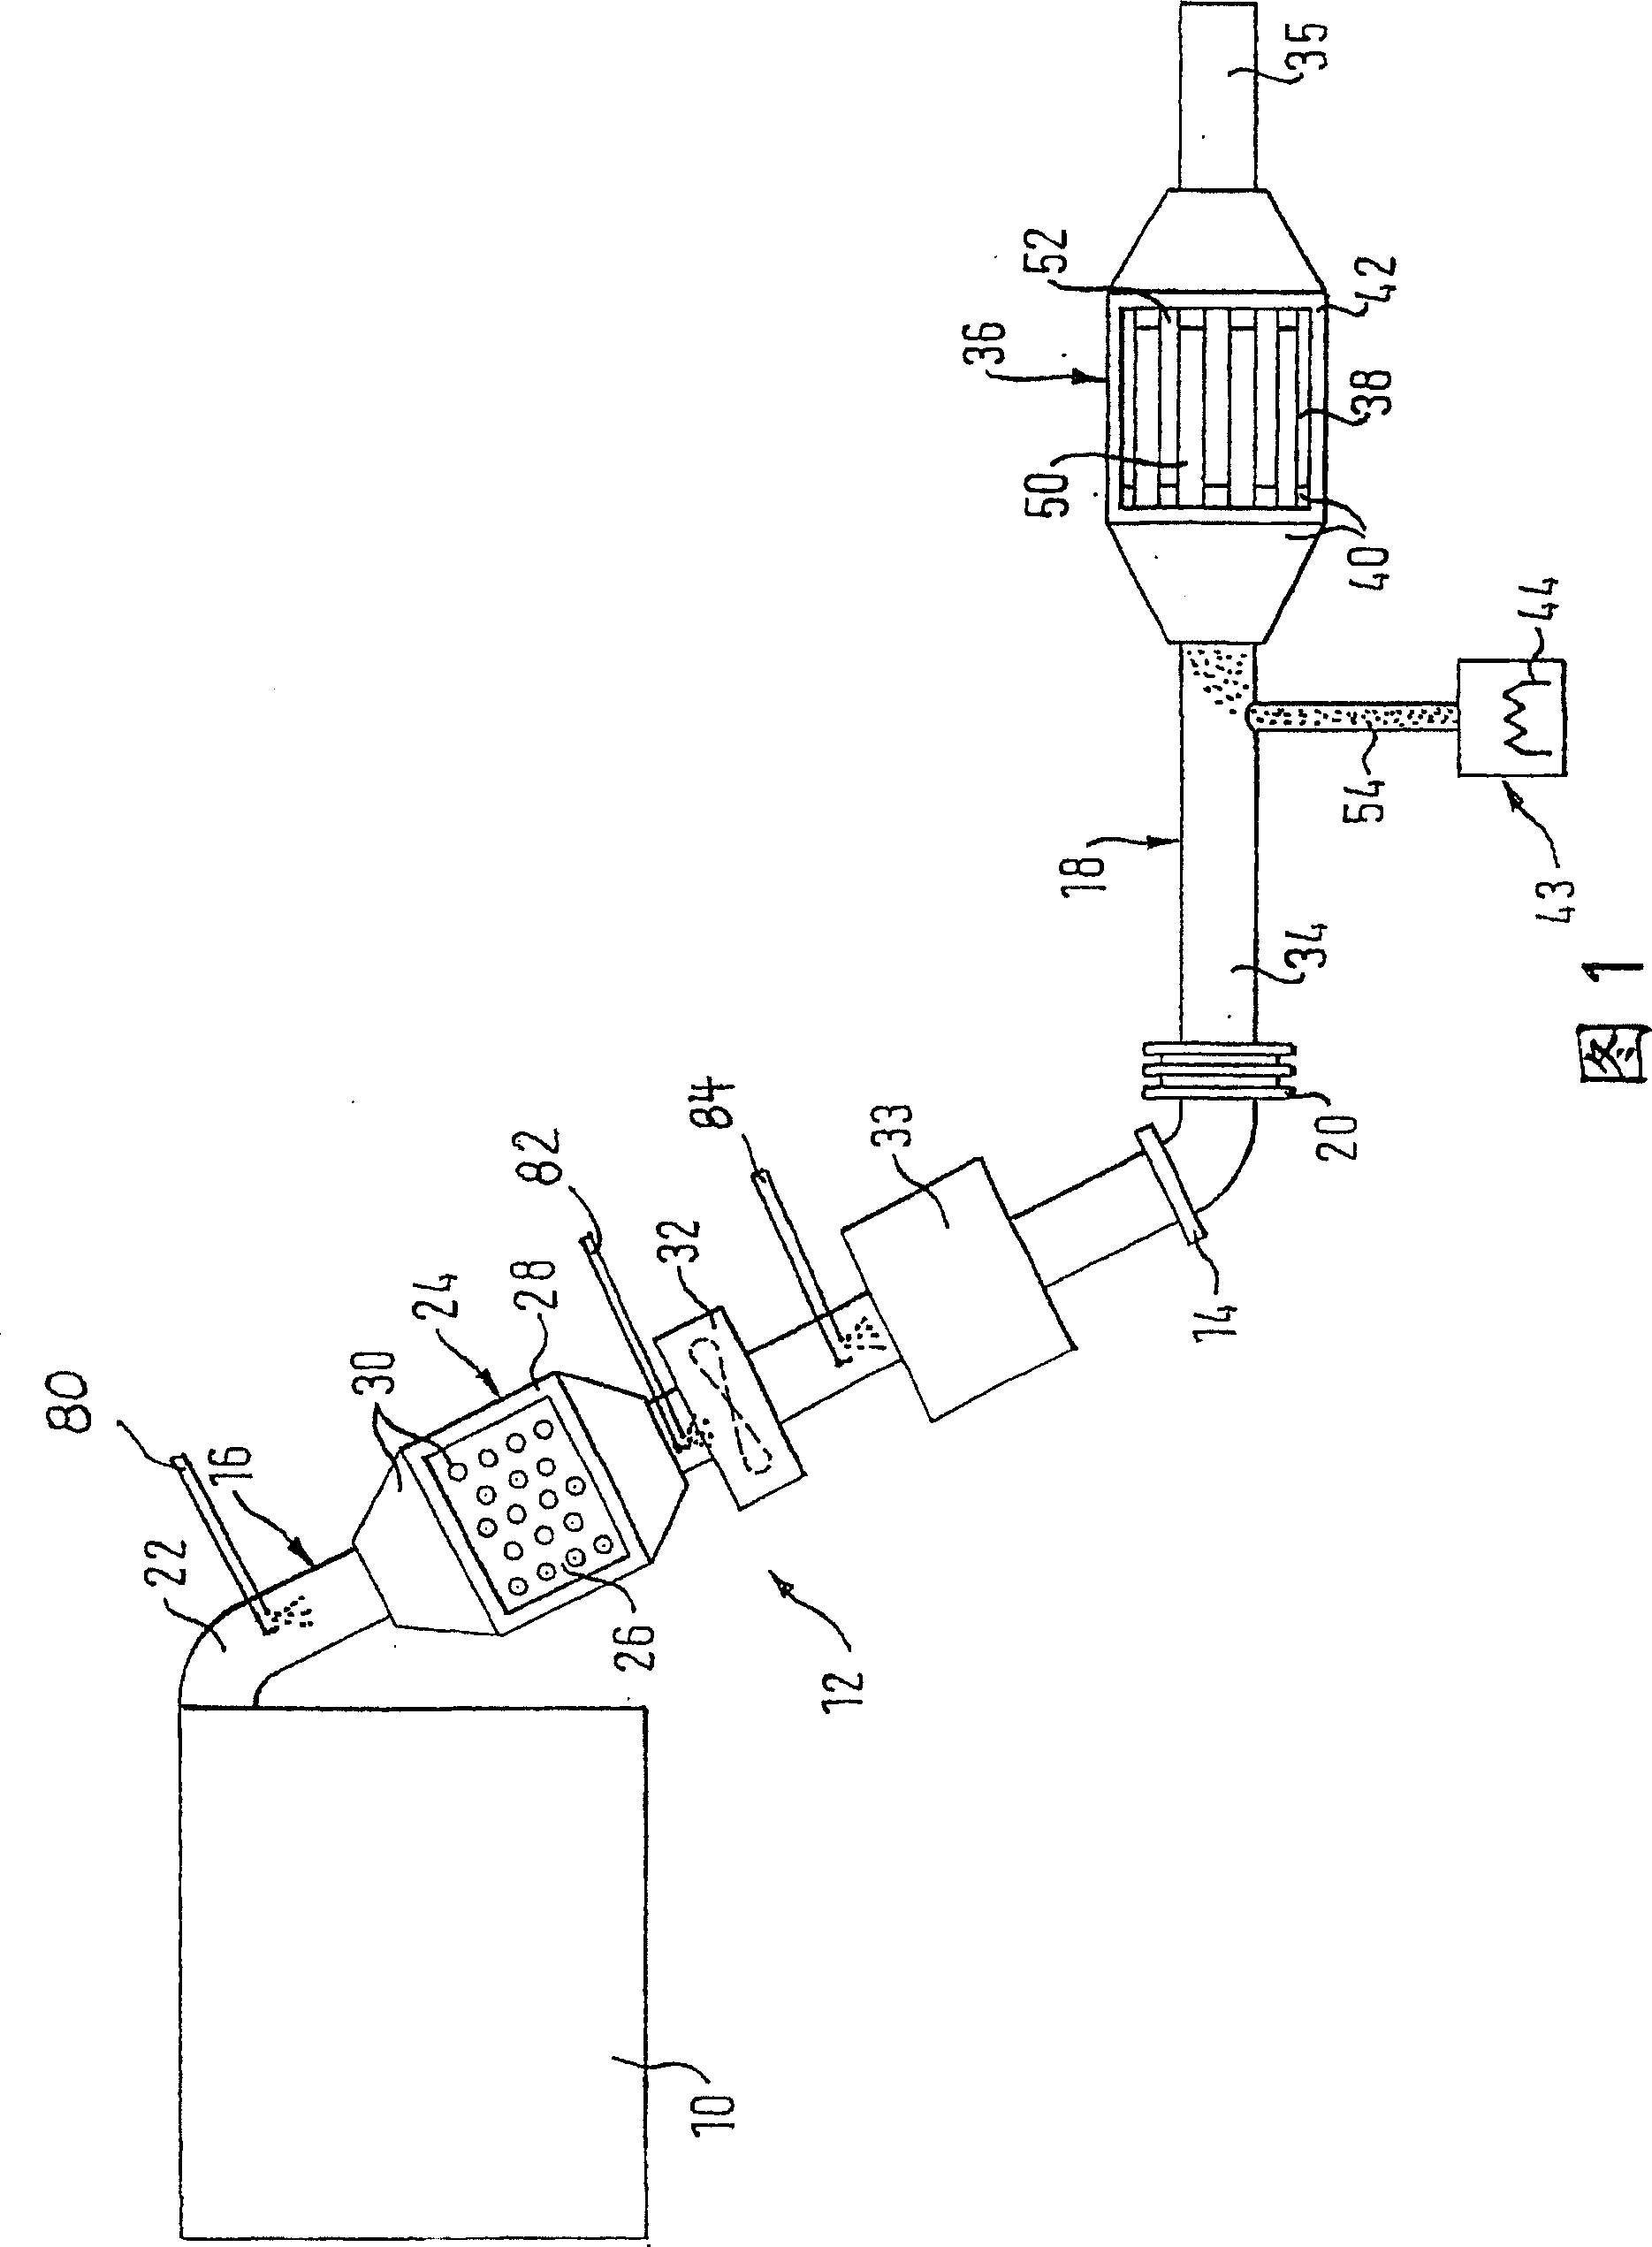 Exhaust gas system of a motor vehicle with a diesel engine